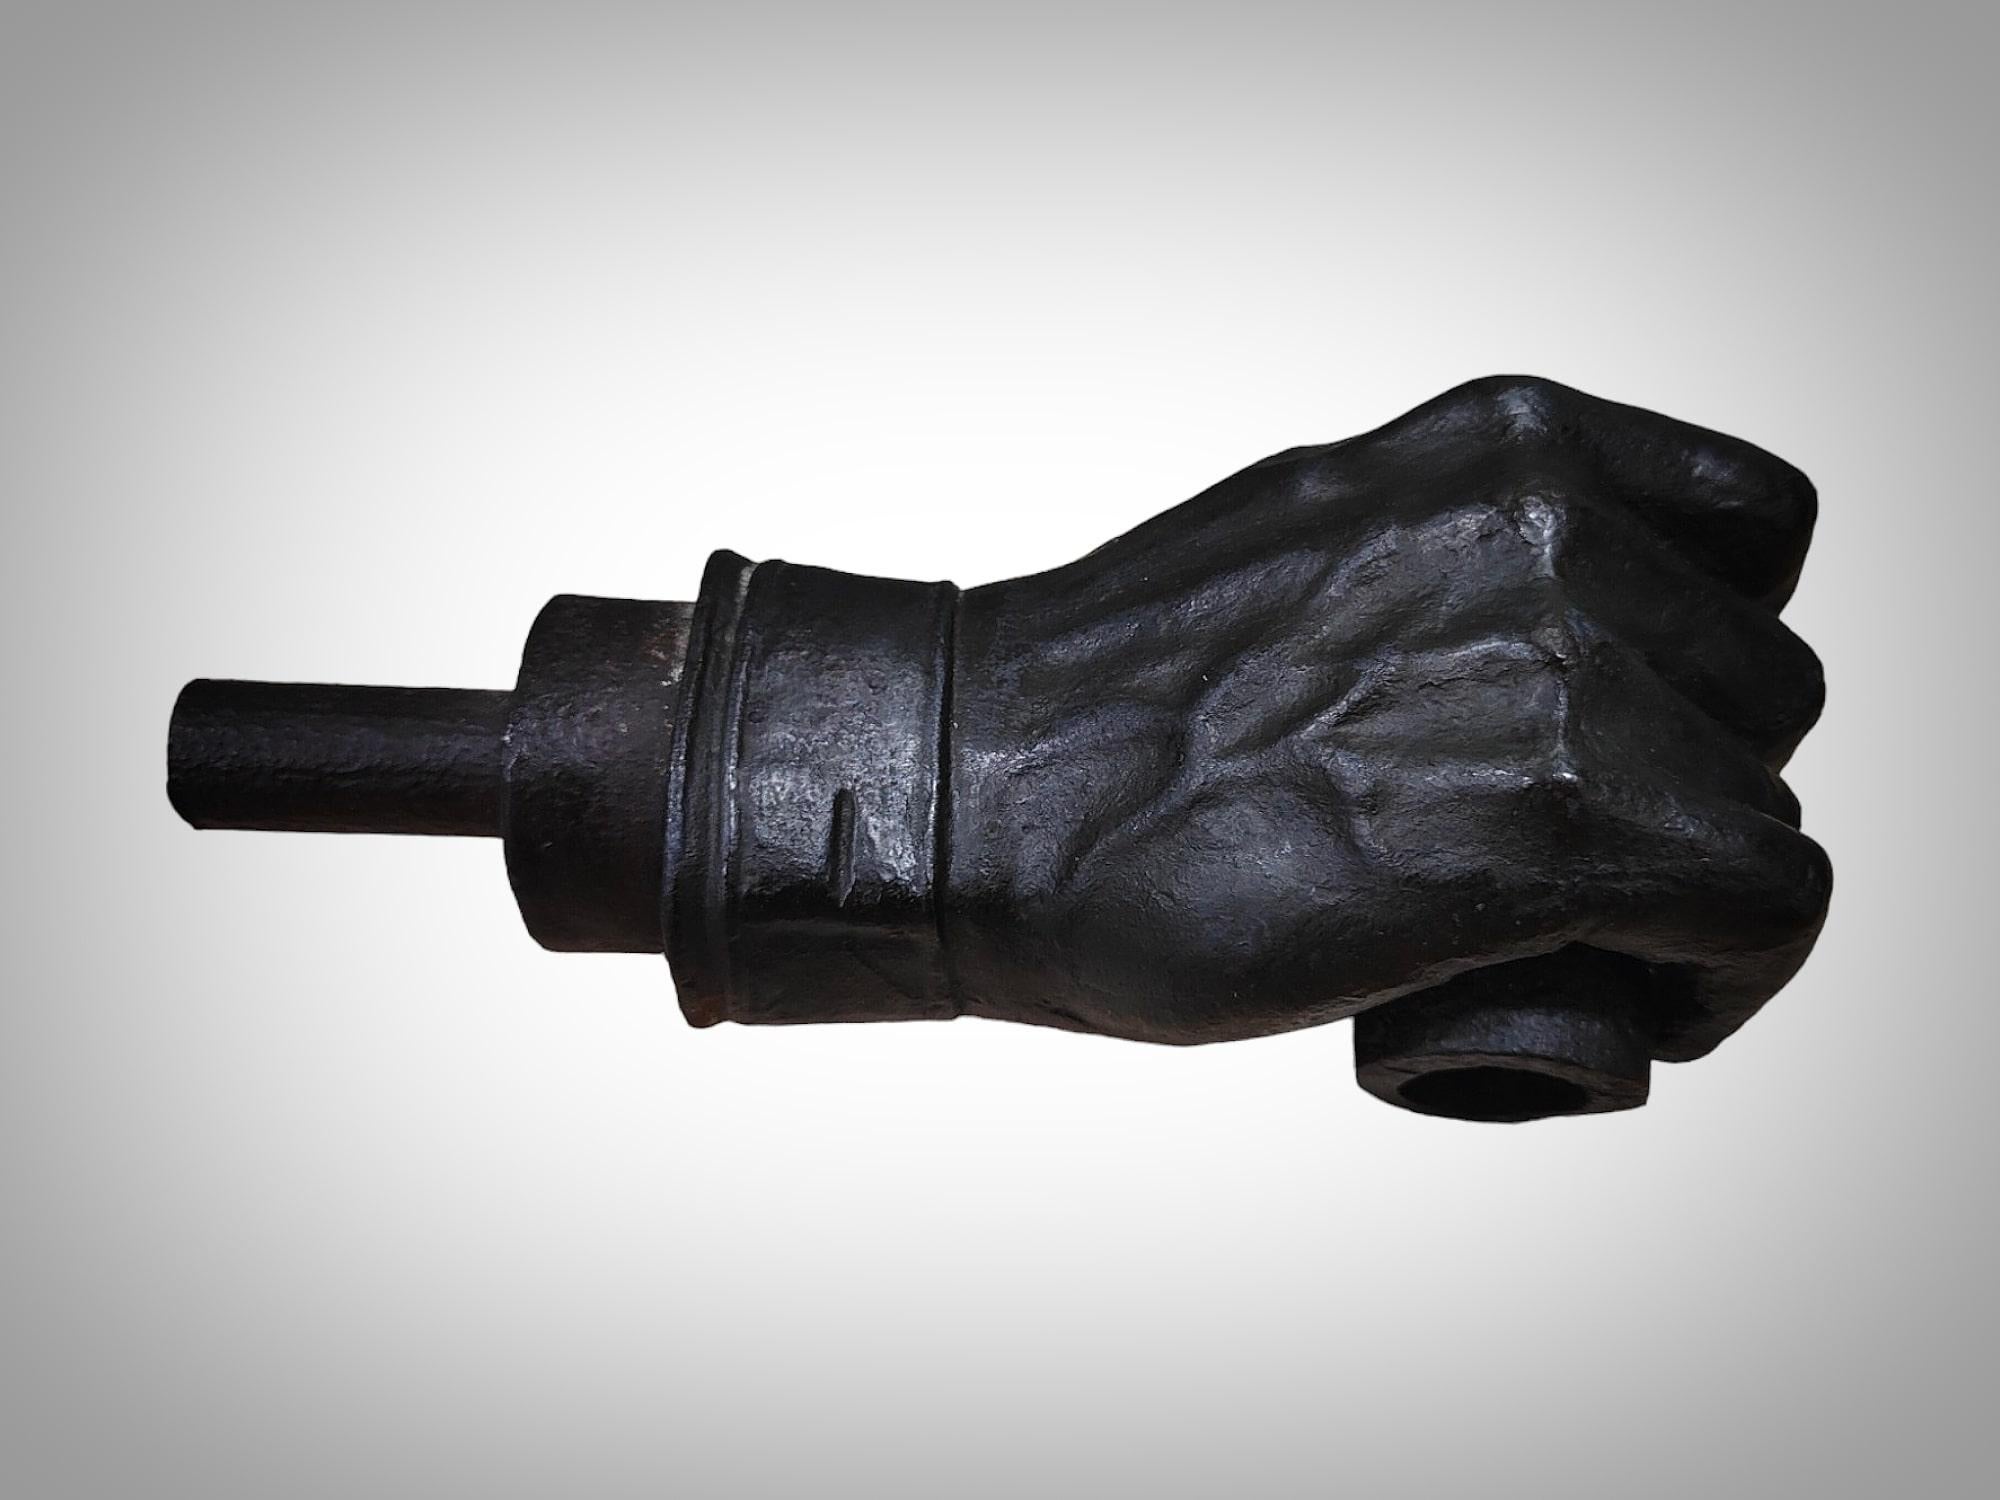 Mid-20th Century Forged Iron Hand Sculpture - Elegant Artisan-Crafted Piece at the Forge by a Mas